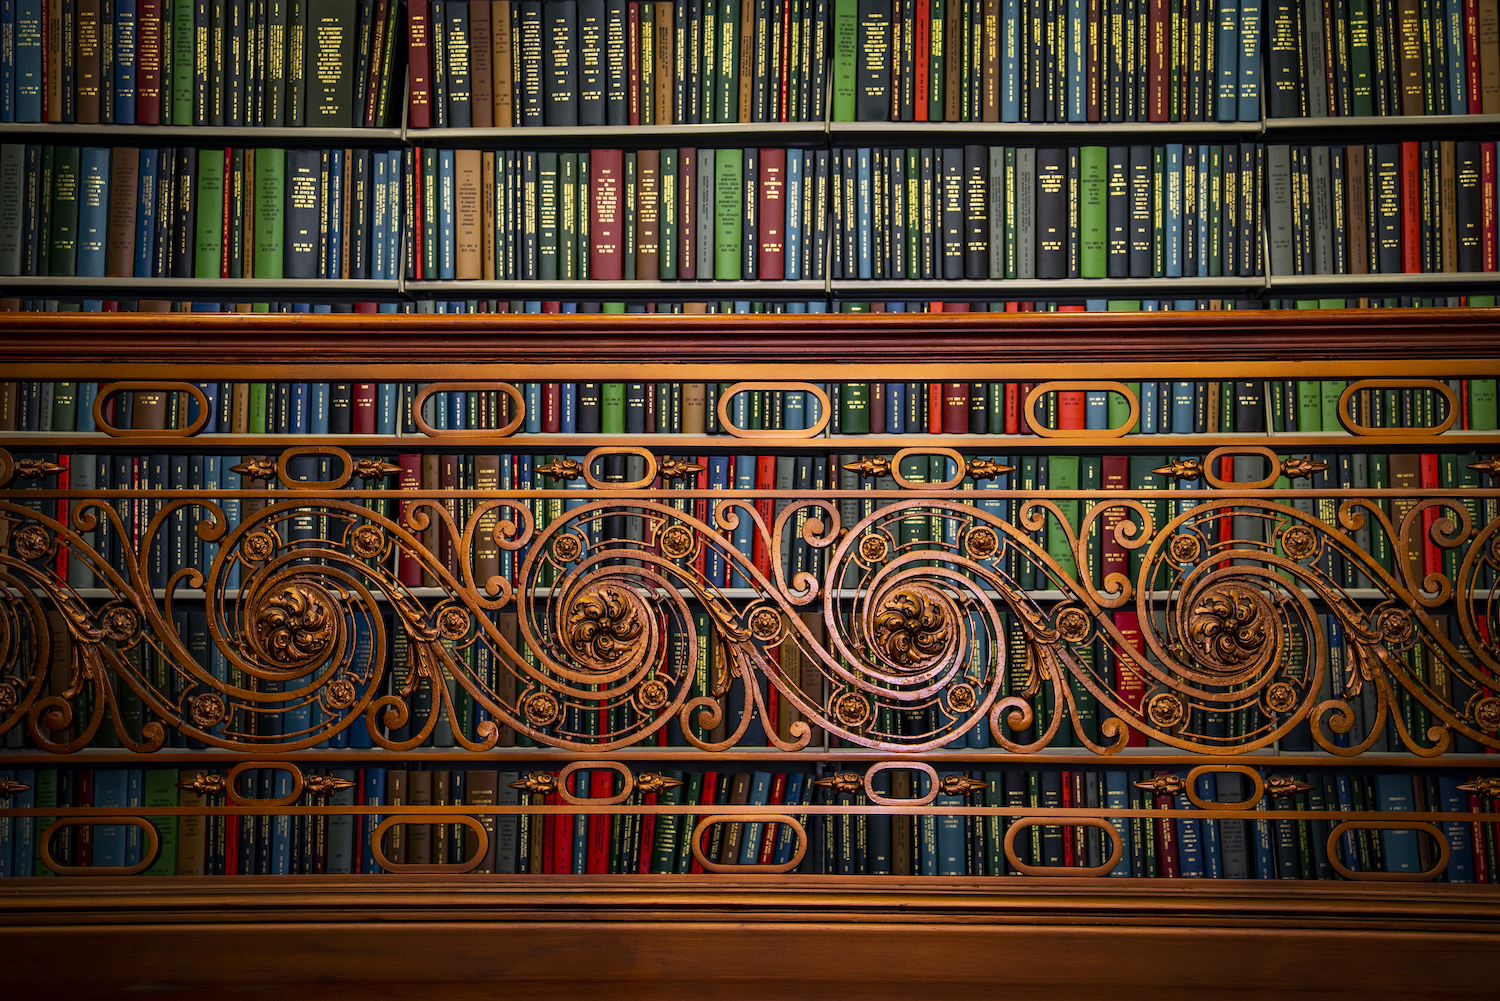 Library stacks as seen behind an ornate balcony railing at CUNY Graduate Center Library